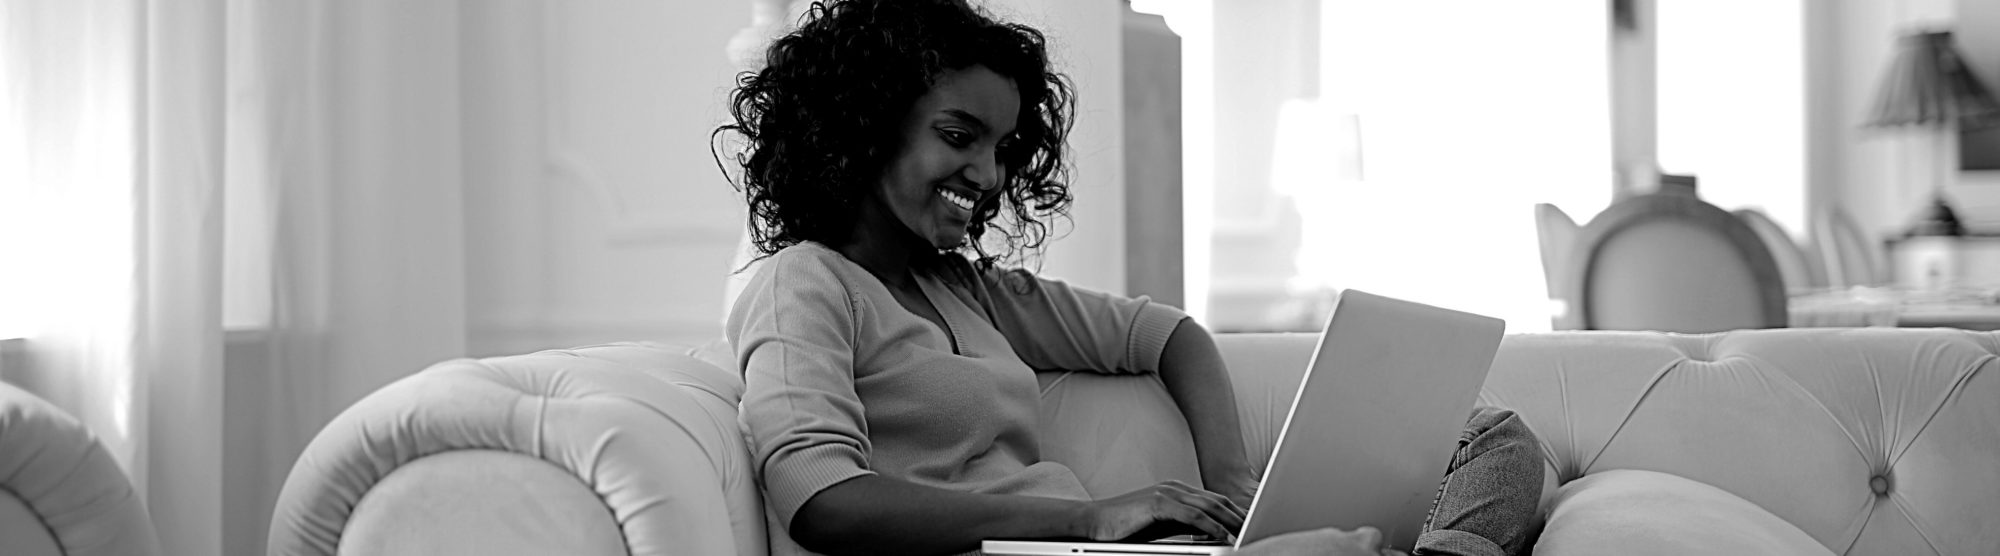 image depicts a woman at home on her sofa, working on a laptop and smiling